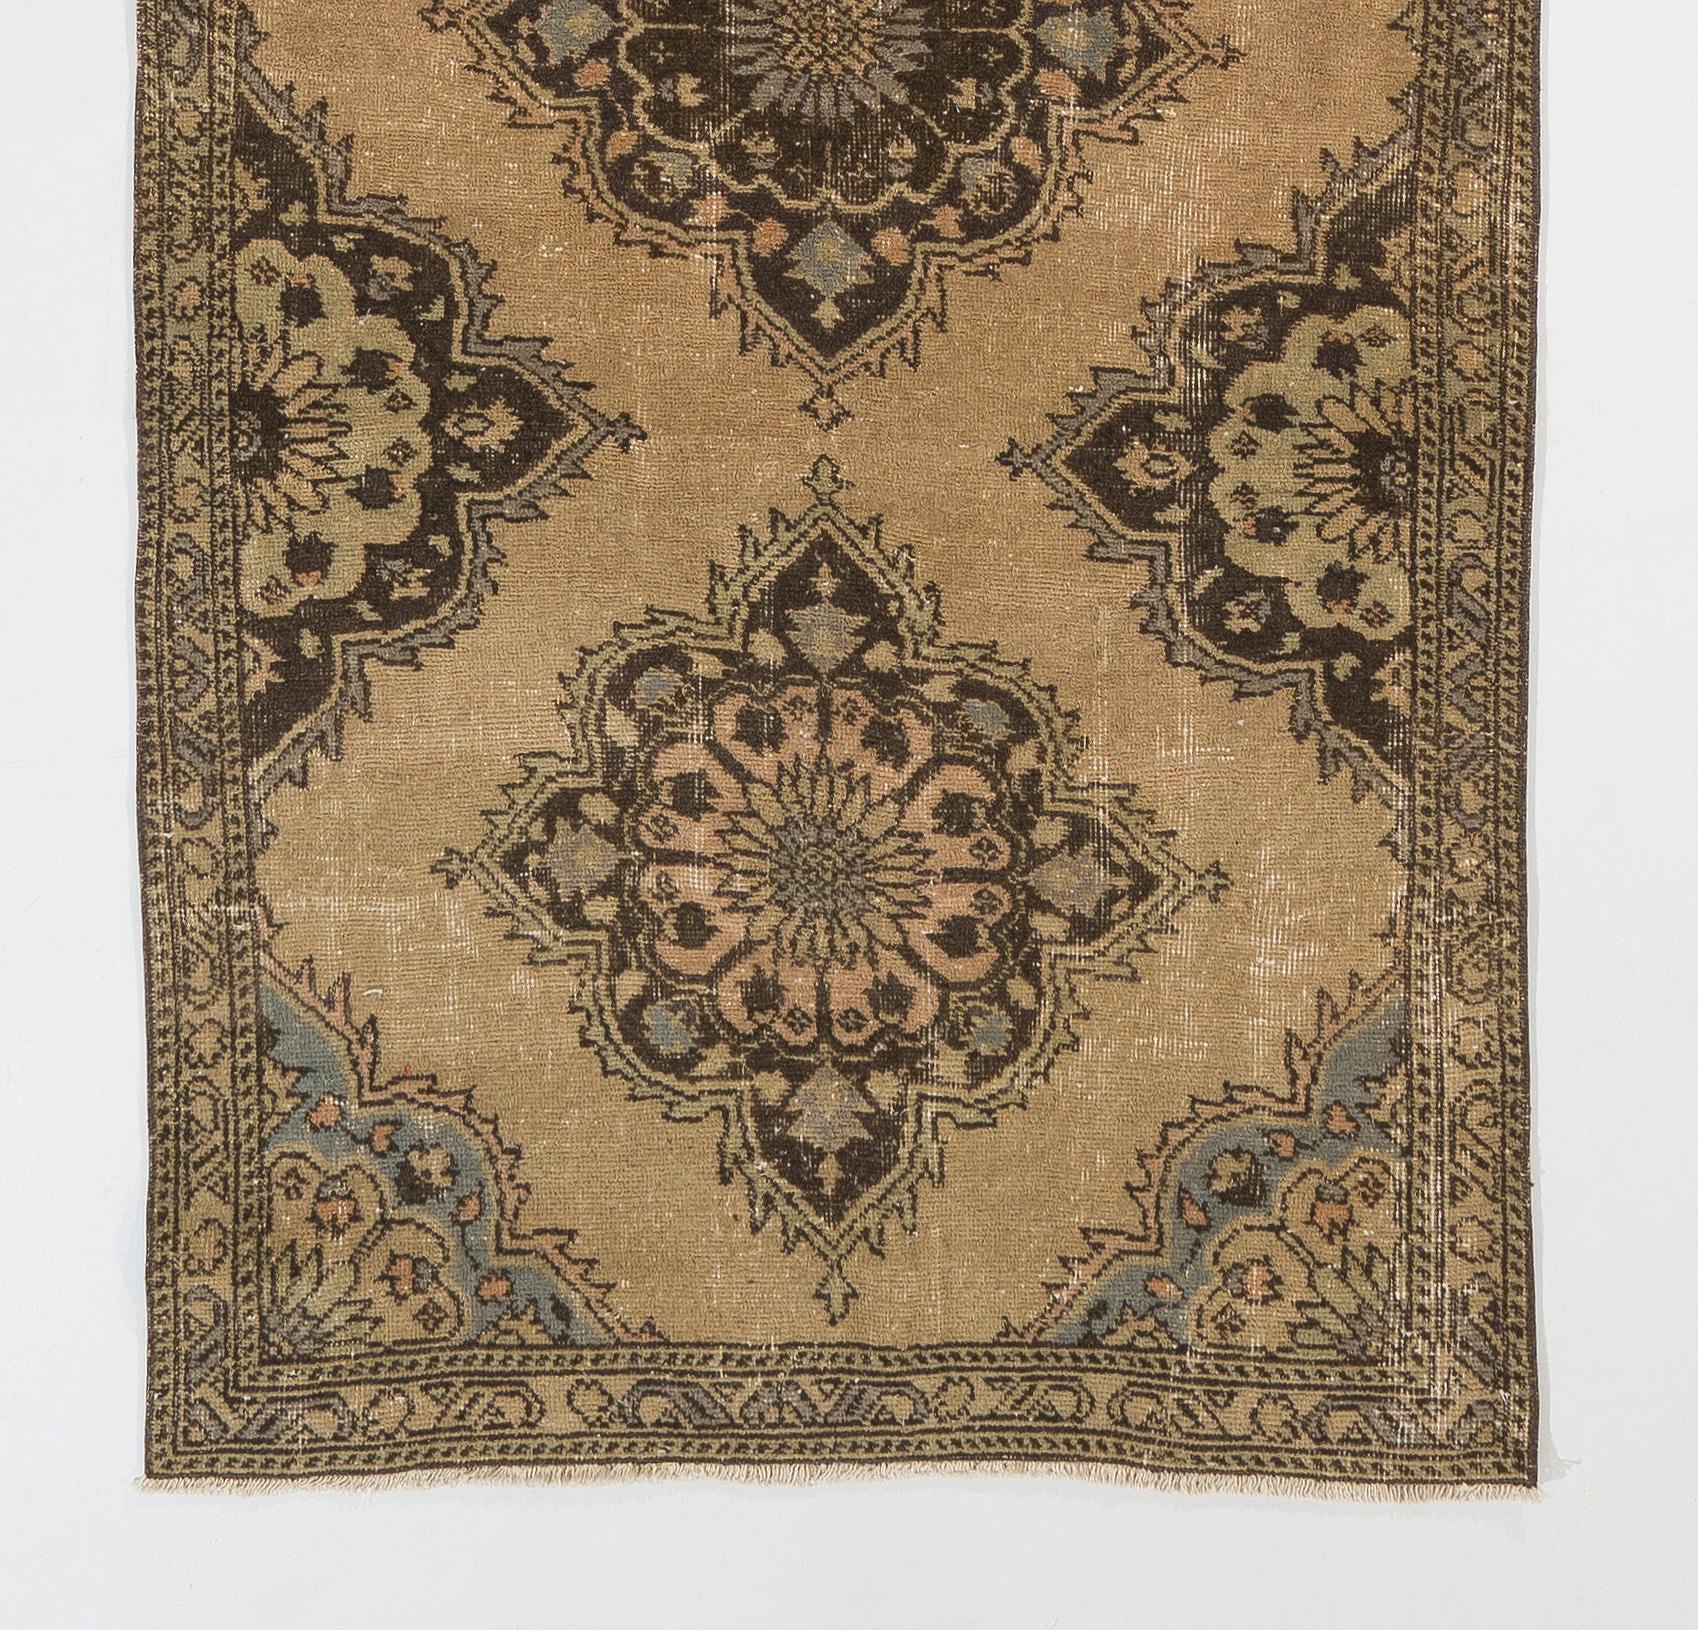 20th Century 3.6x11.7 Ft Hand-Knotted Turkish Oushak Wool Runner Rug. Vintage Corridor Carpet For Sale